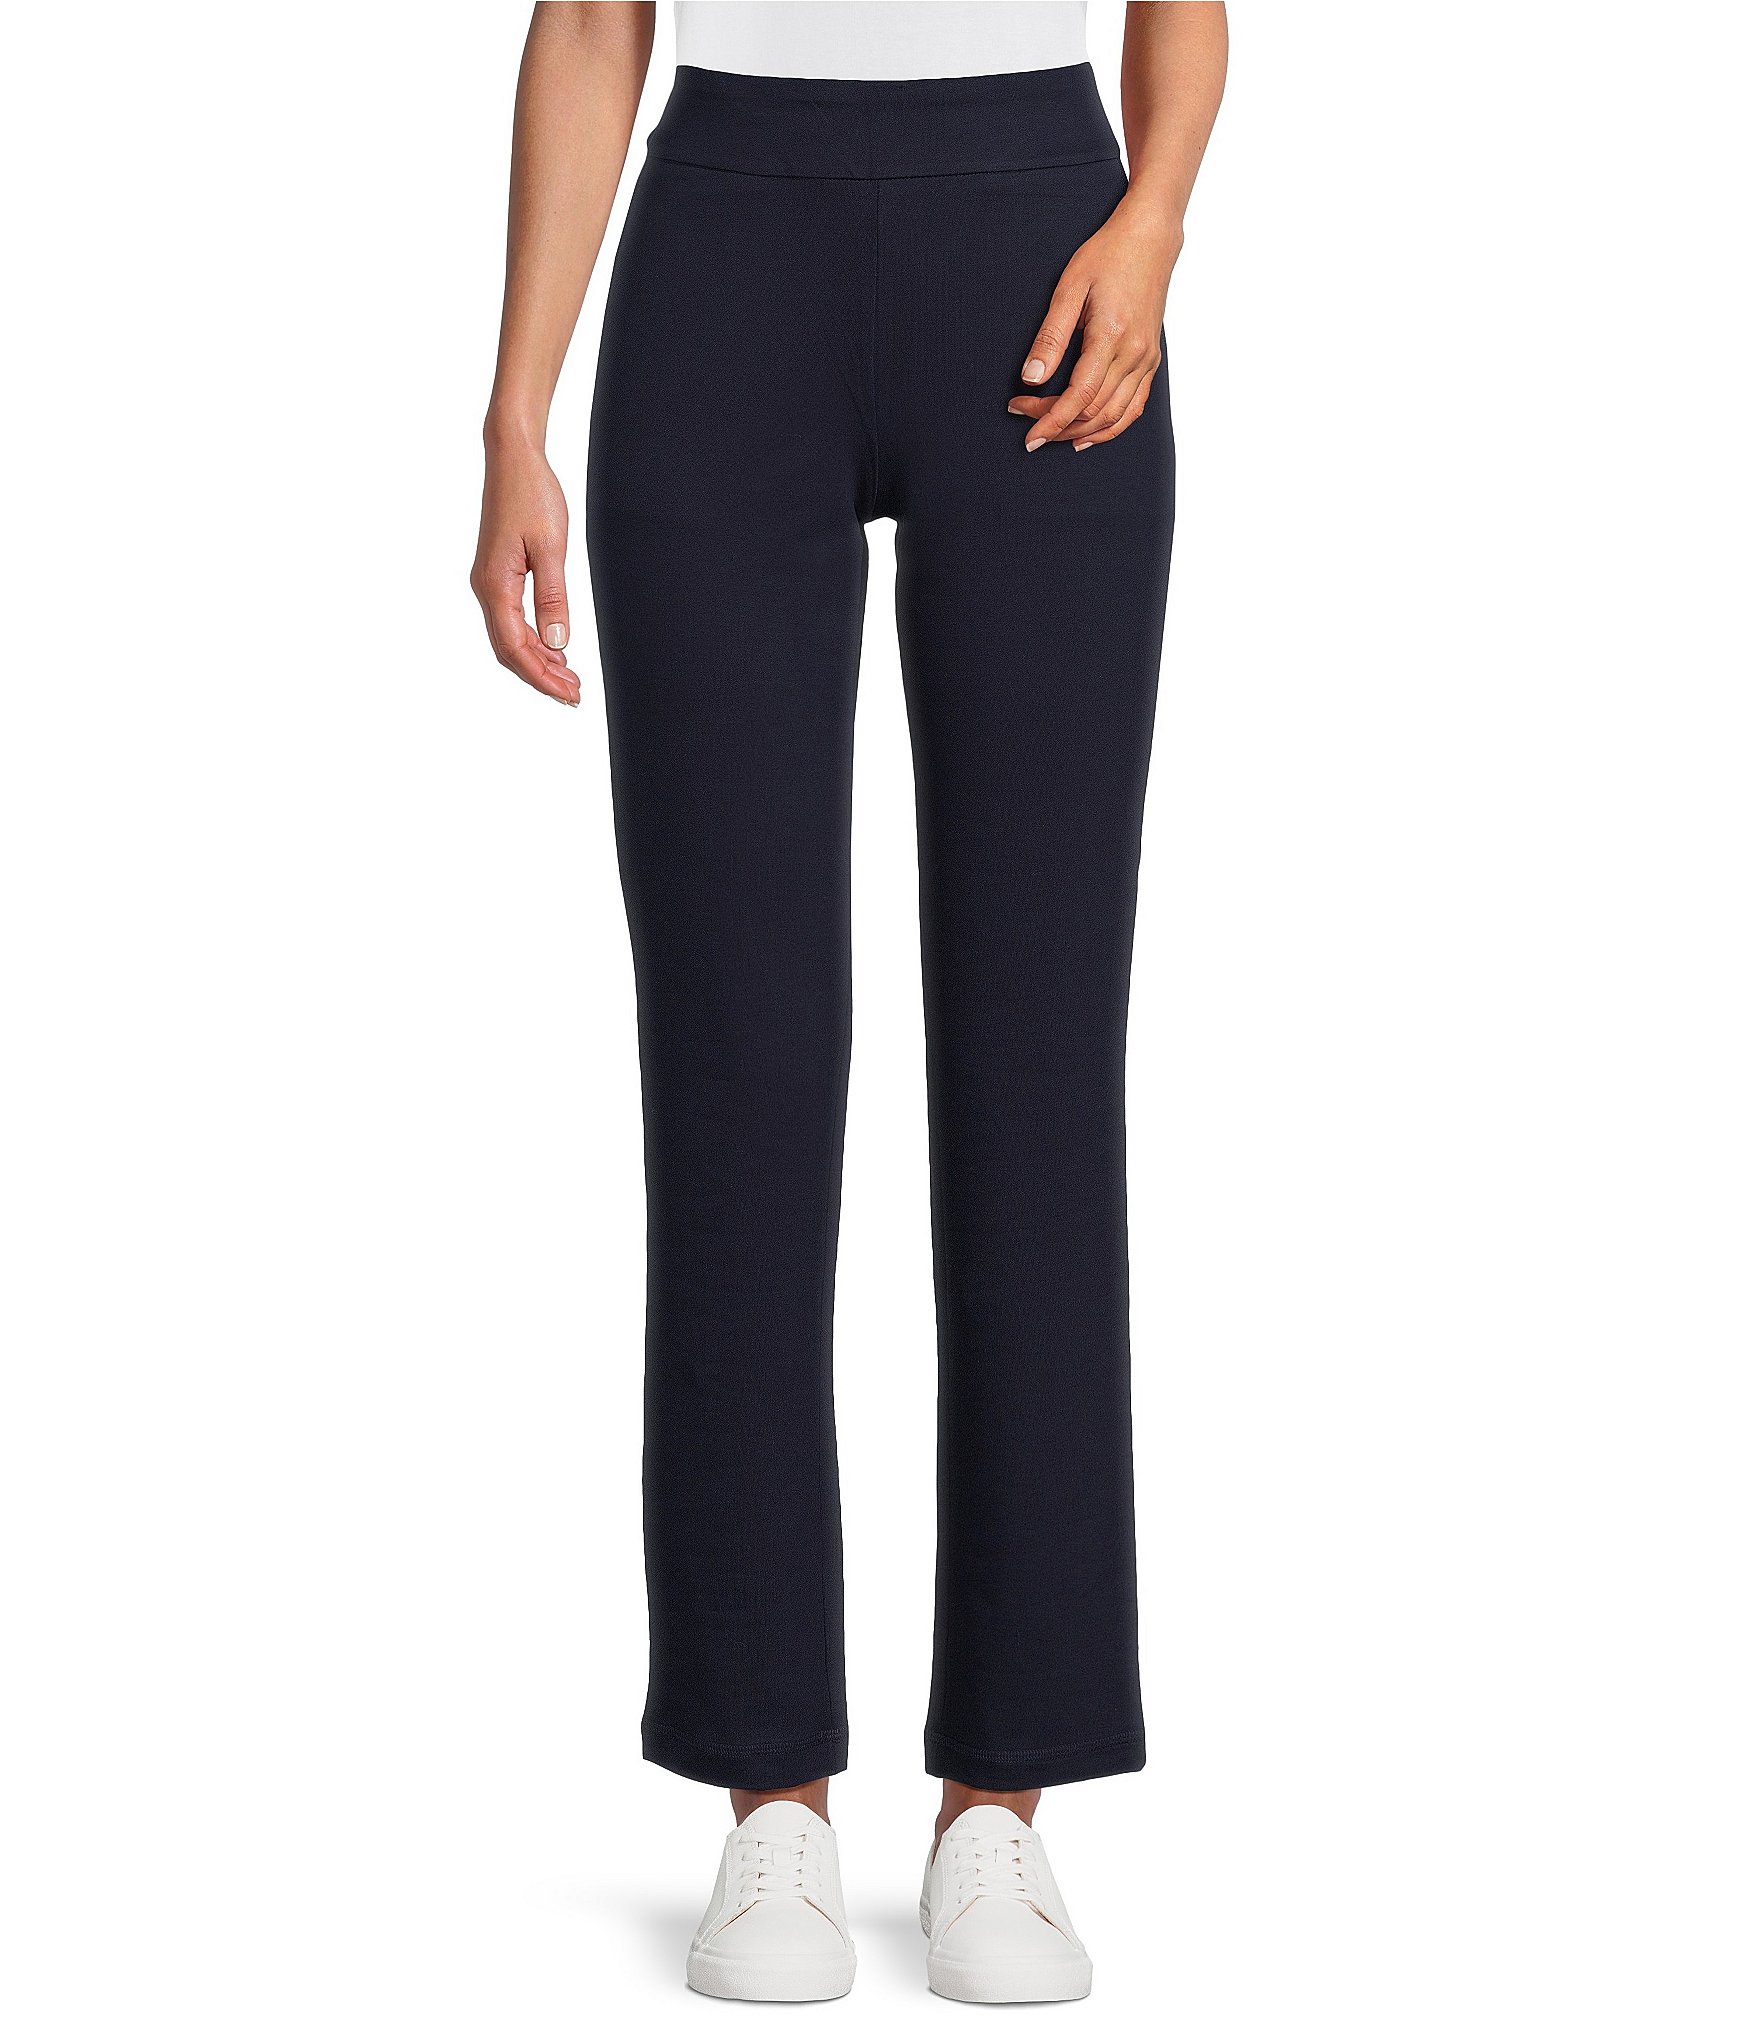 Allison Daley Petite Size Coordinating Straight Leg Pull-On Pant ...